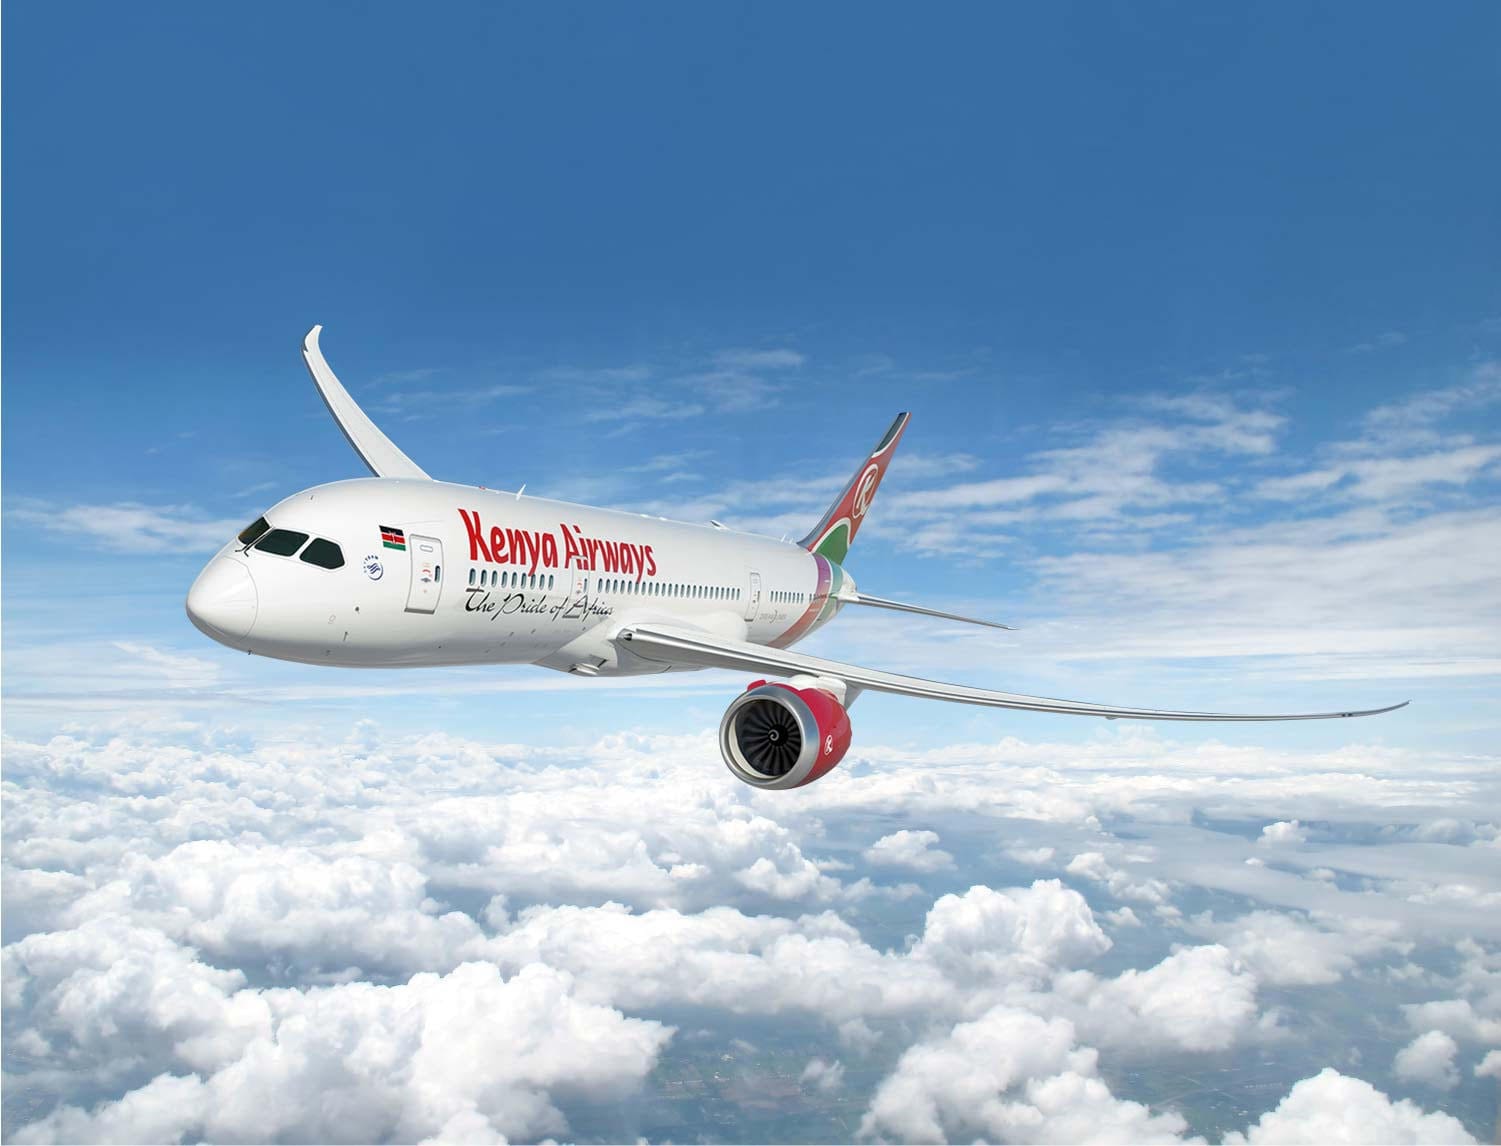 Kenya Airways is offering a new New York to Nairobi route that has tourism officials very happy in East Africa.